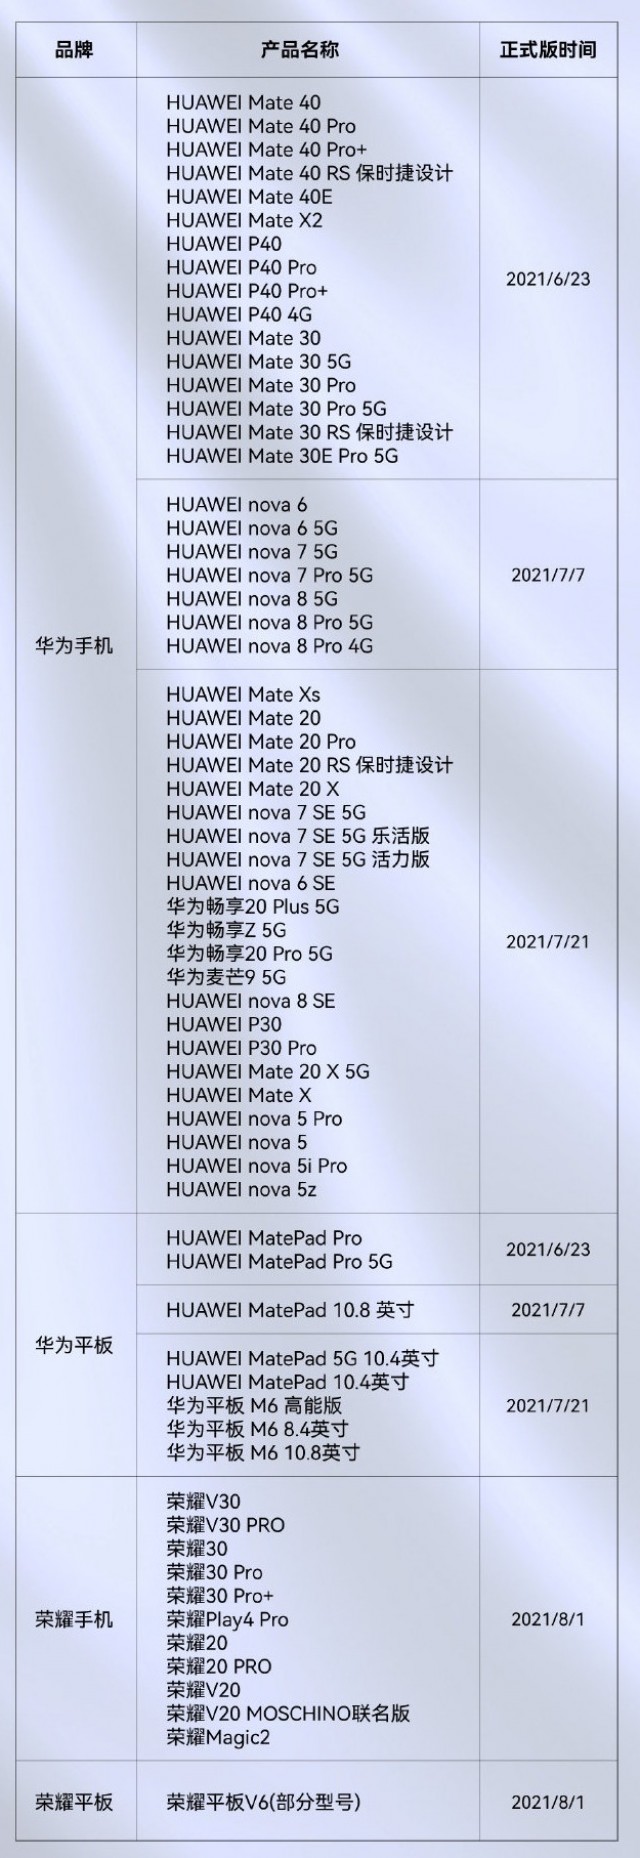 Full list of Huawei and Honor devices